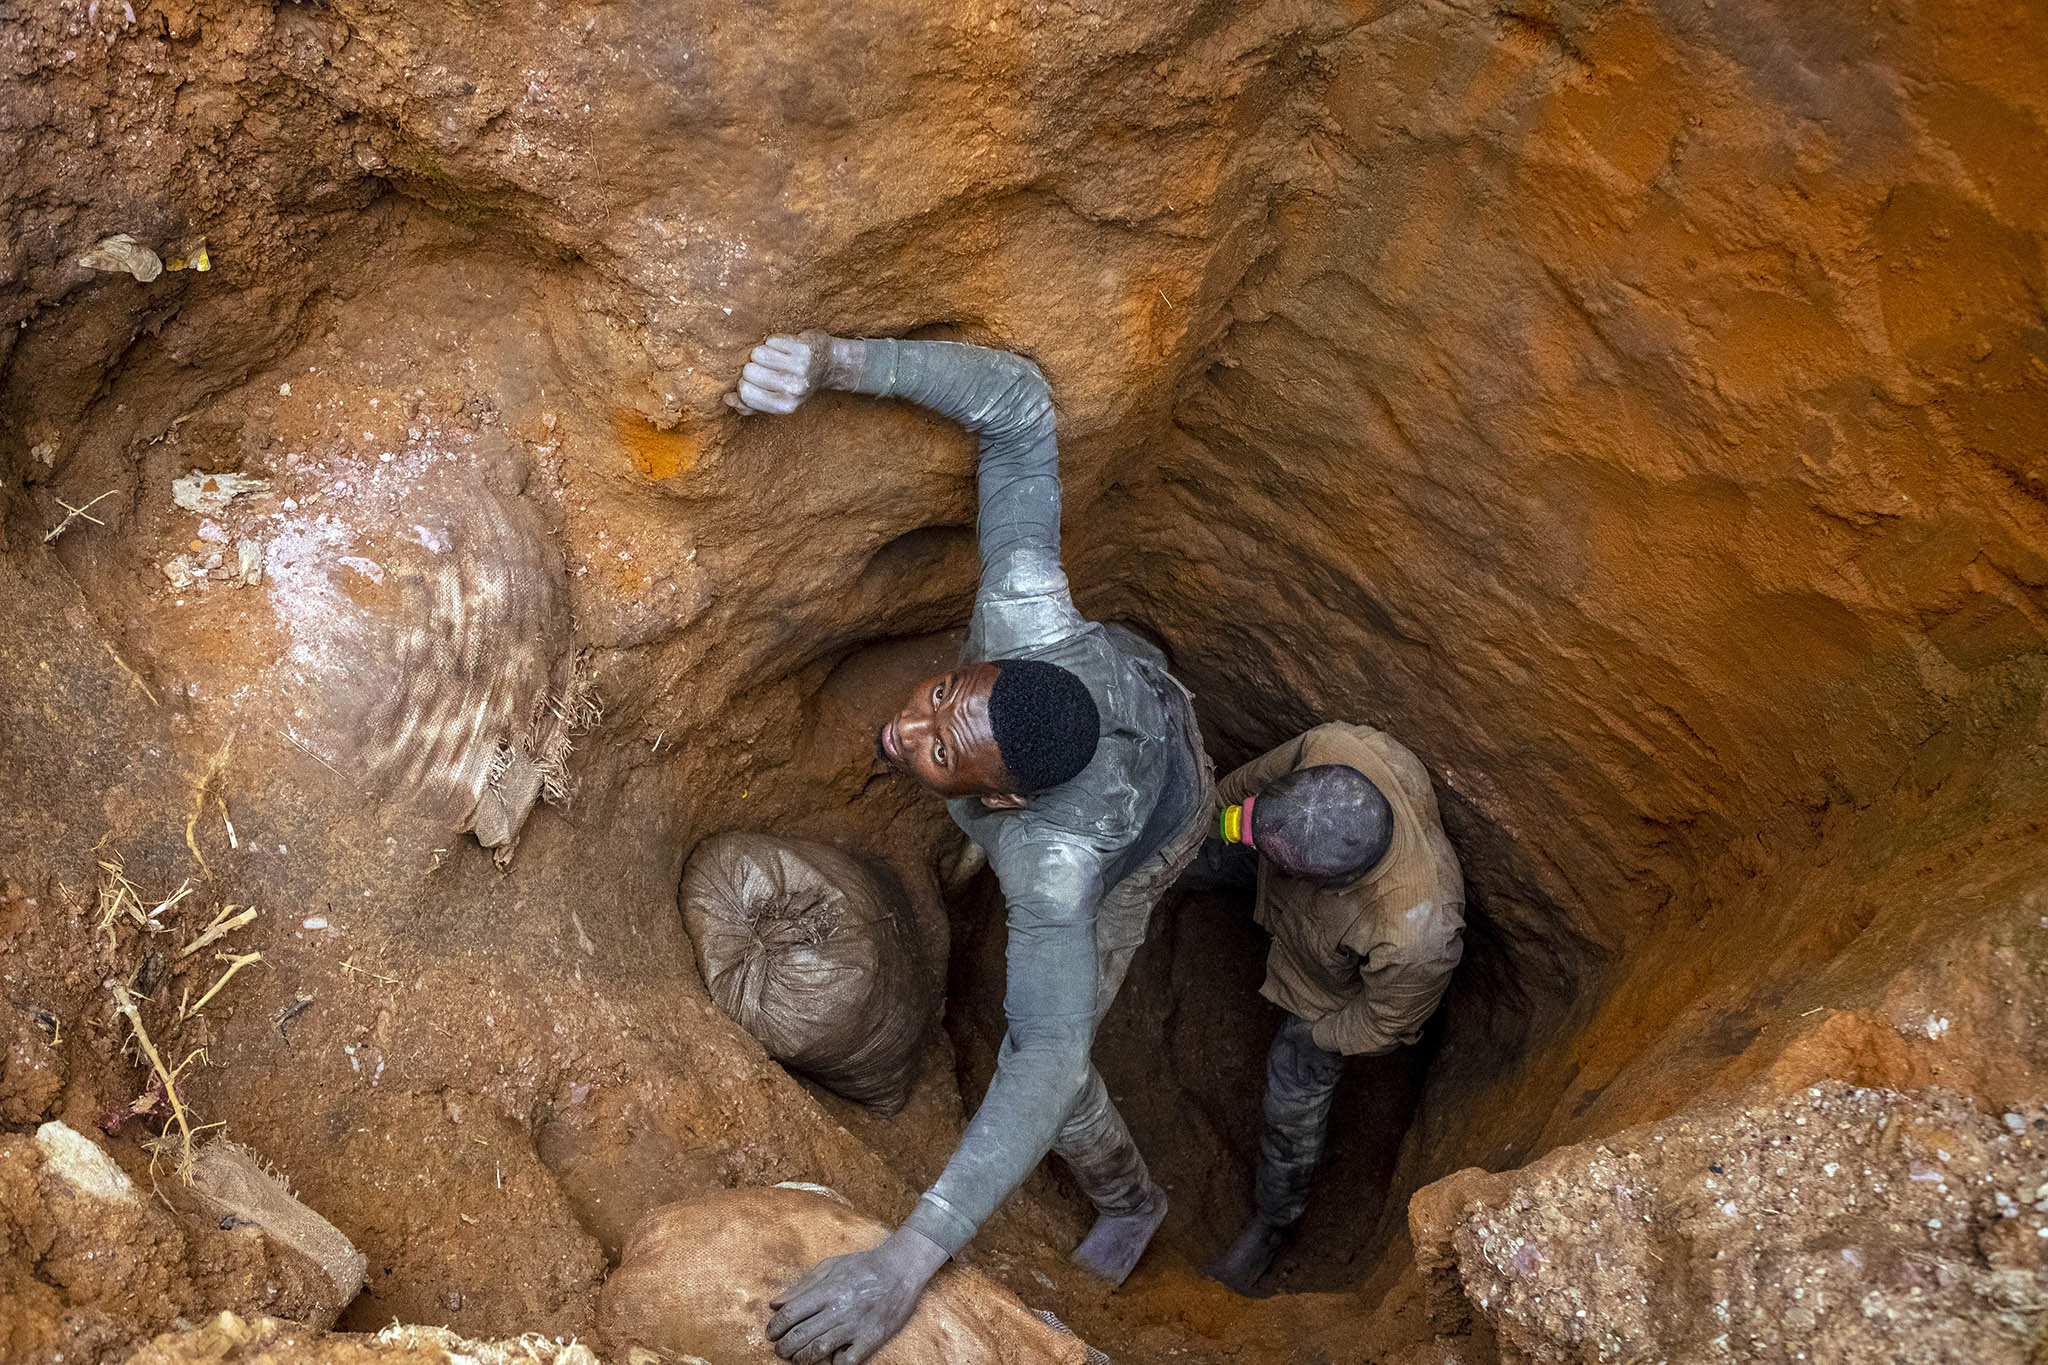 Jose Bumba, left, pulls a 220-pound bag of cobalt from a makeshift mine in Kasulo, the Democratic Republic of the Congo, on April 26, 2021. (Ashley Gilbertson/The New York Times)]